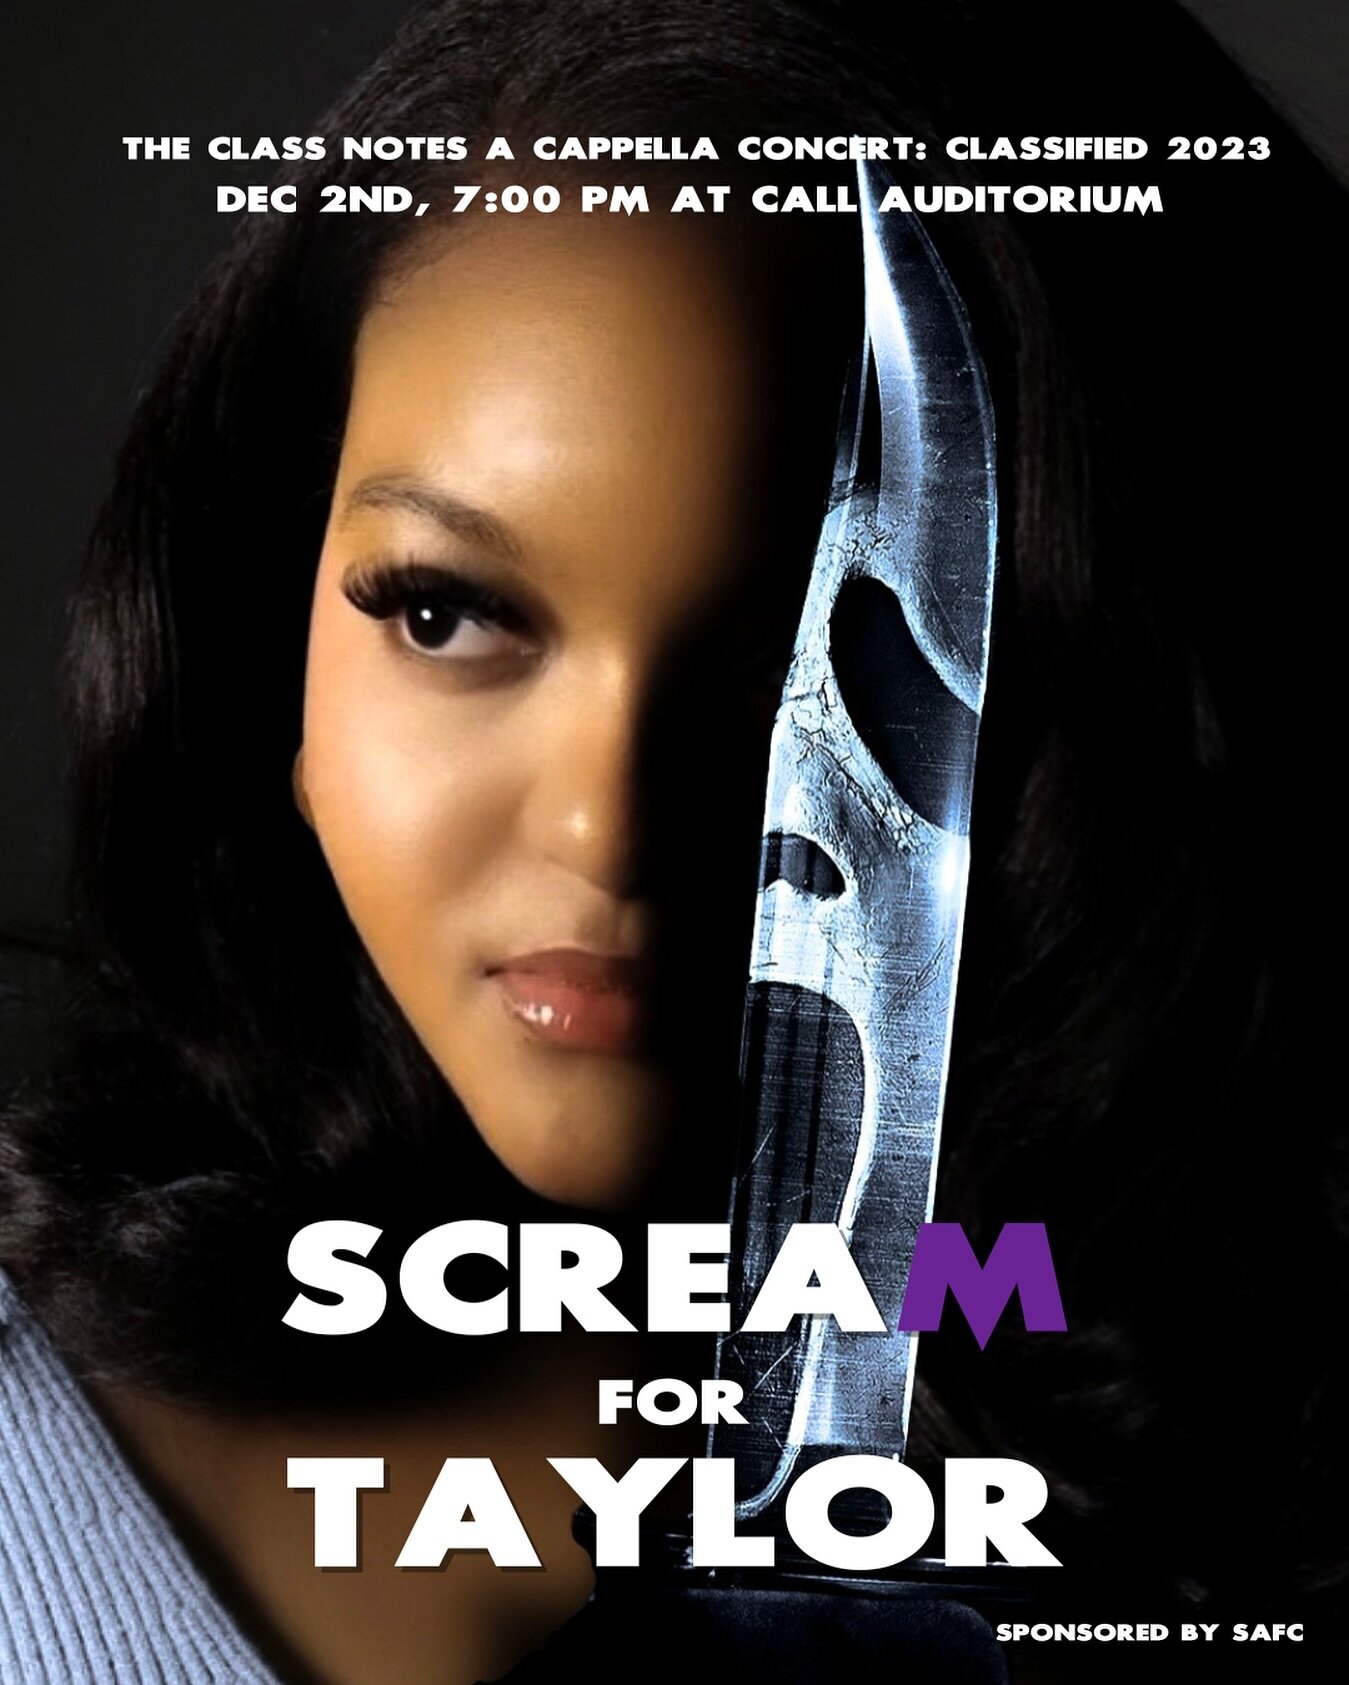 SCREAM for Taylor and the Class Notes TOMORROW at our fall concert on December 2nd, at 7PM at Call Auditorium. Get your ticket through the link in our bio or DM us.